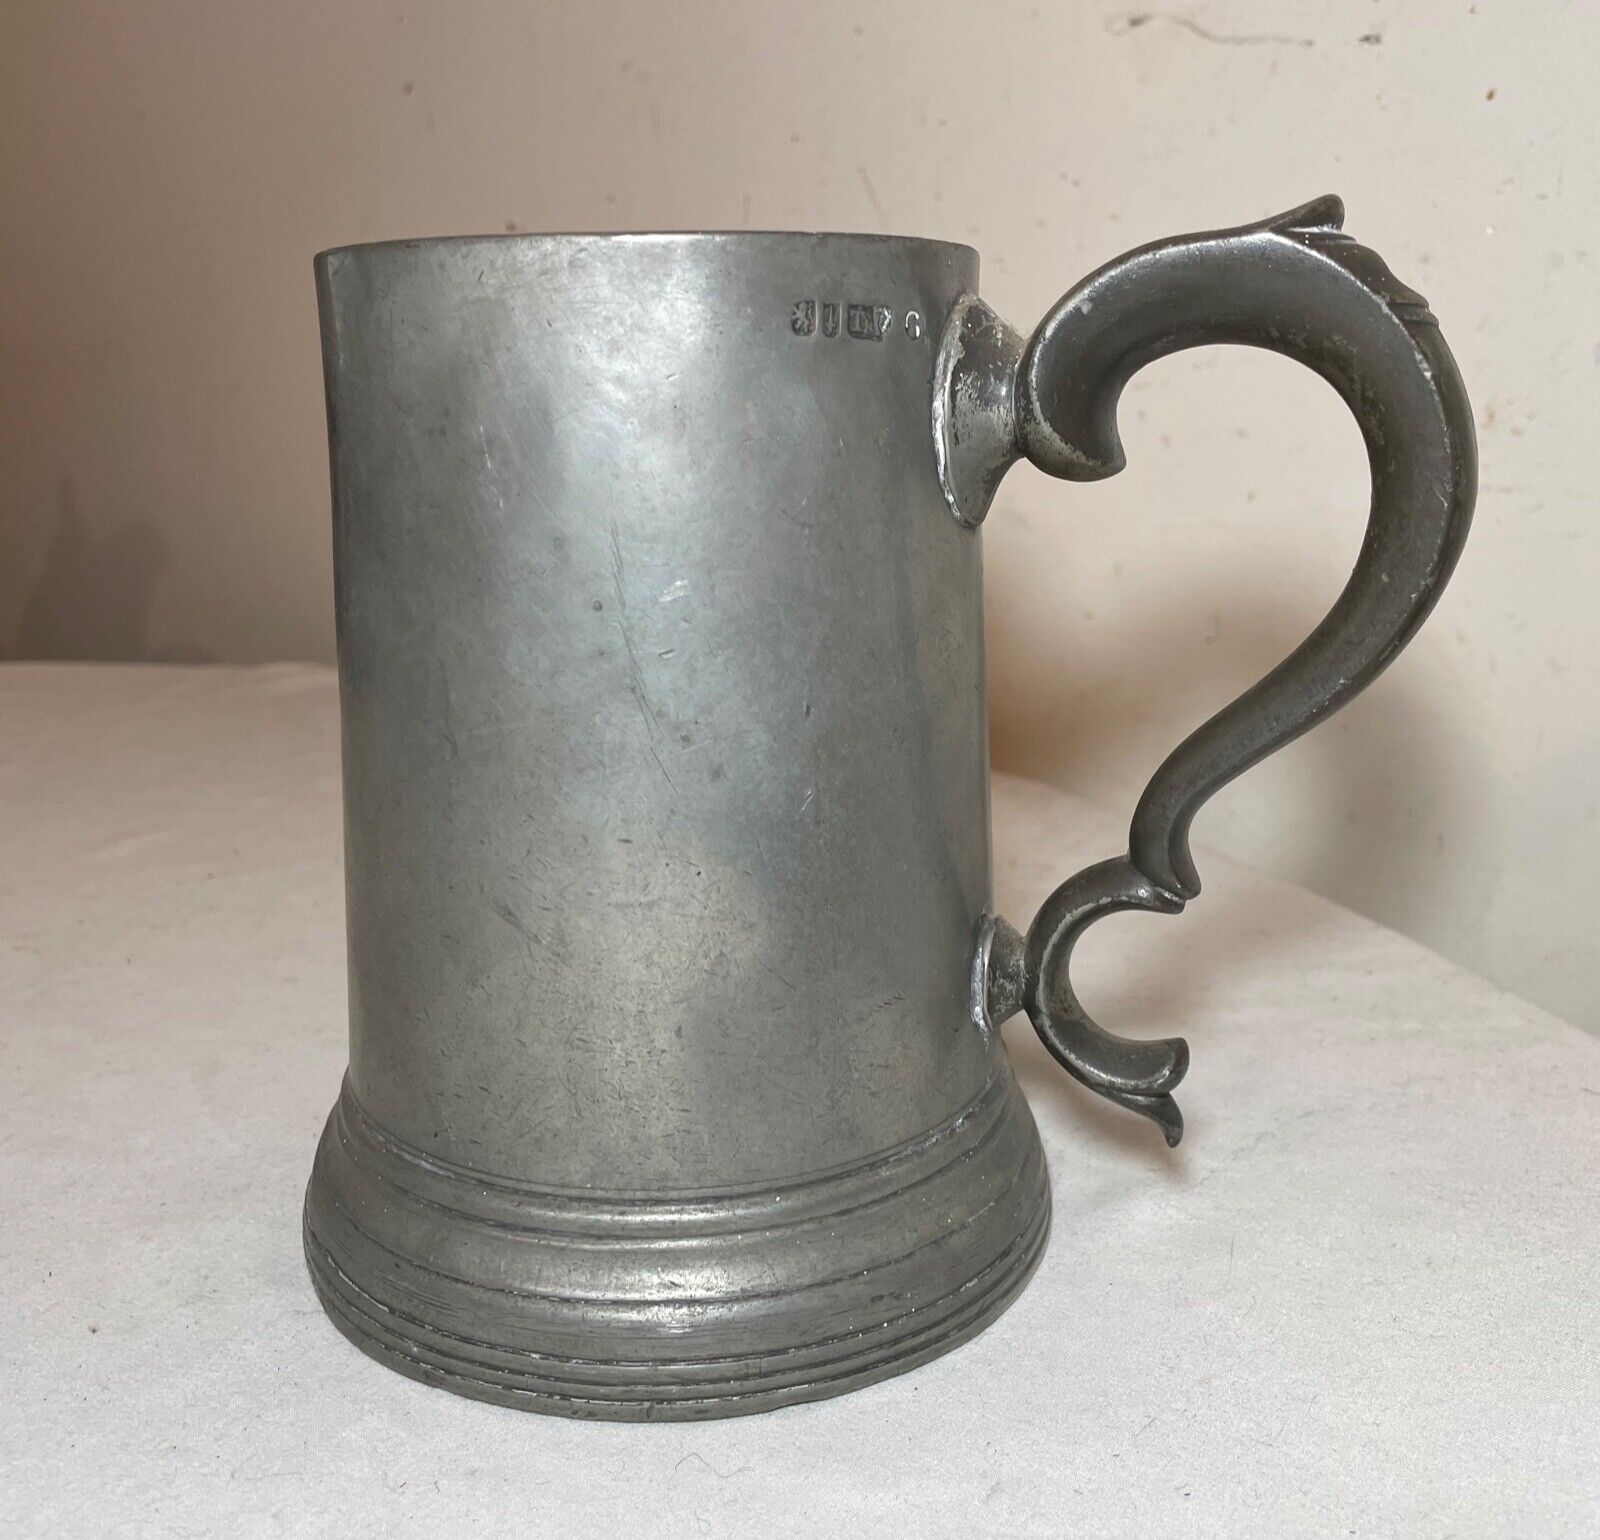 rare antique 18th century 1700's handmade pewter beer mug stein touch early mark